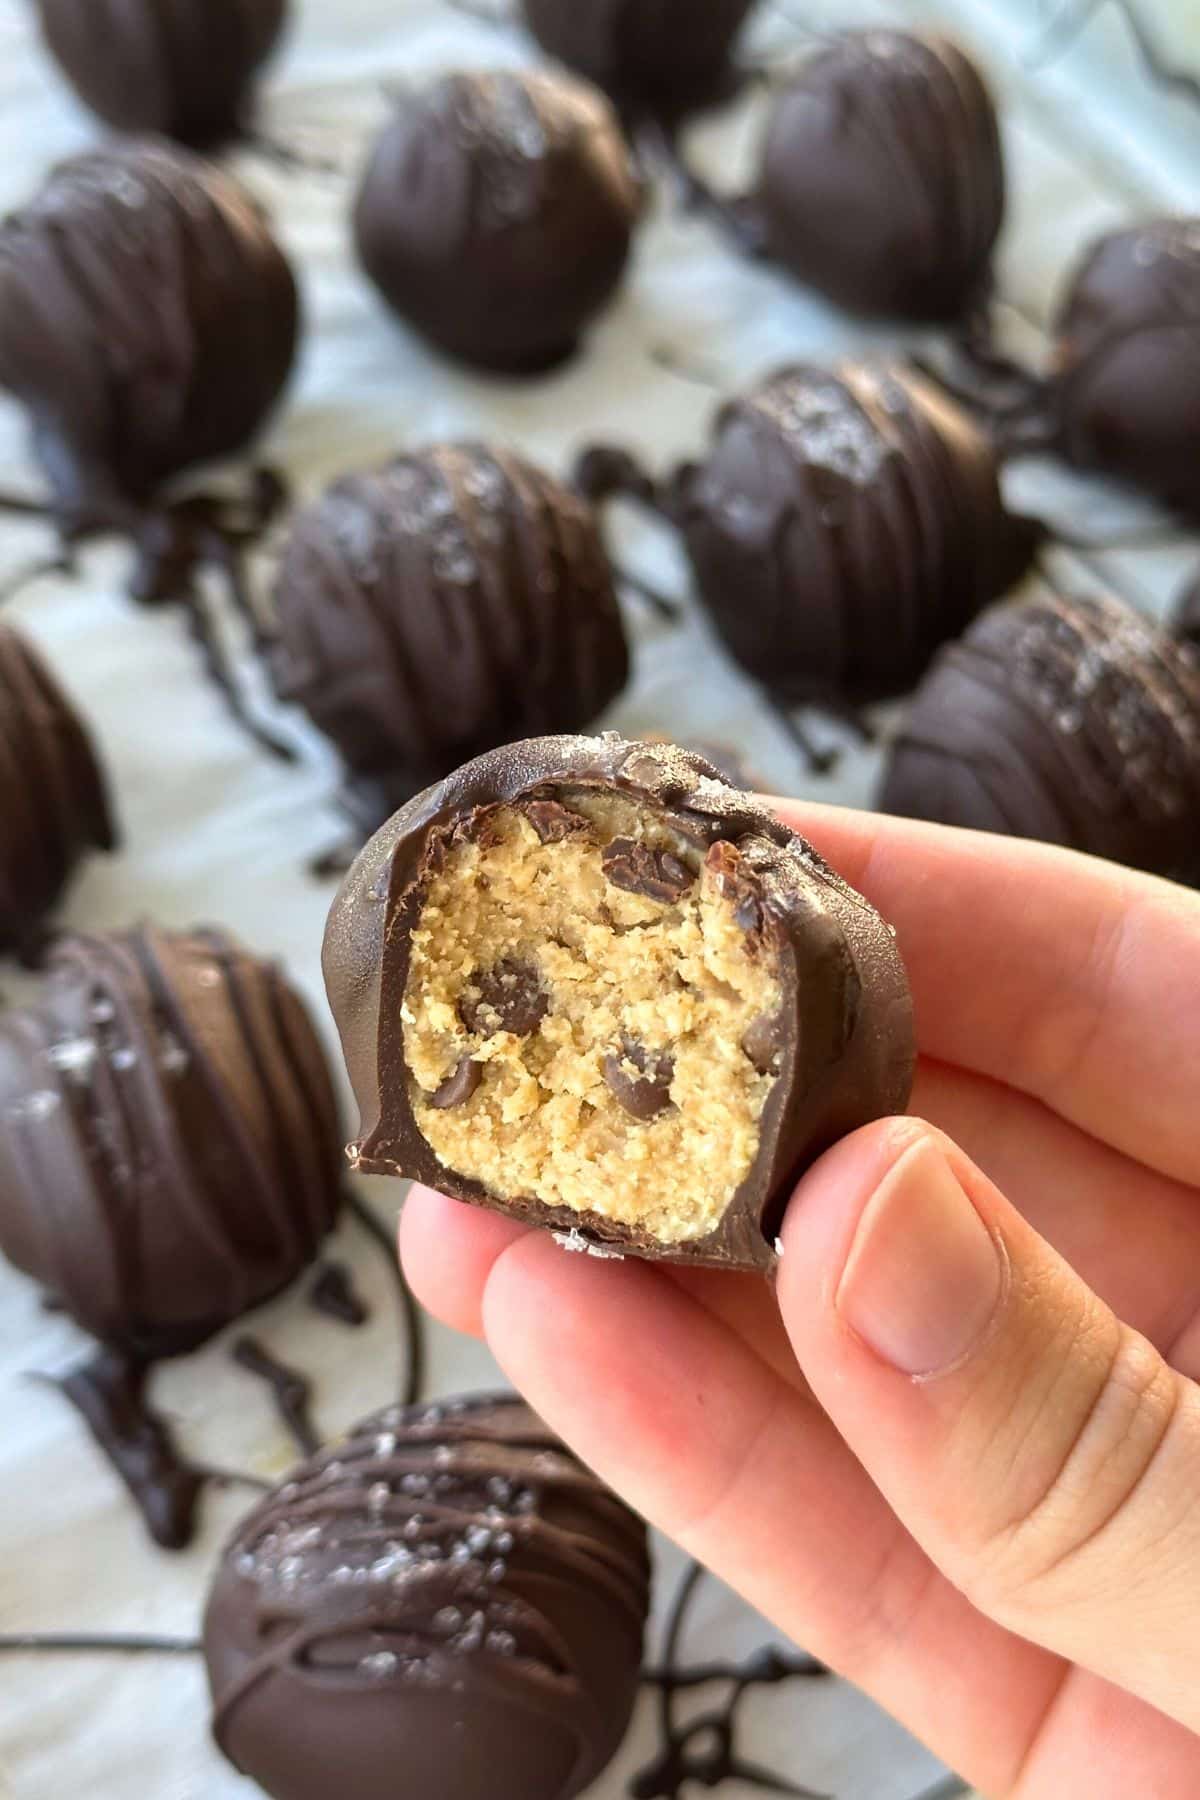 Chocolate covered chickpea cookie dough truffle with a bit taken out of it. The background shows more truffles.